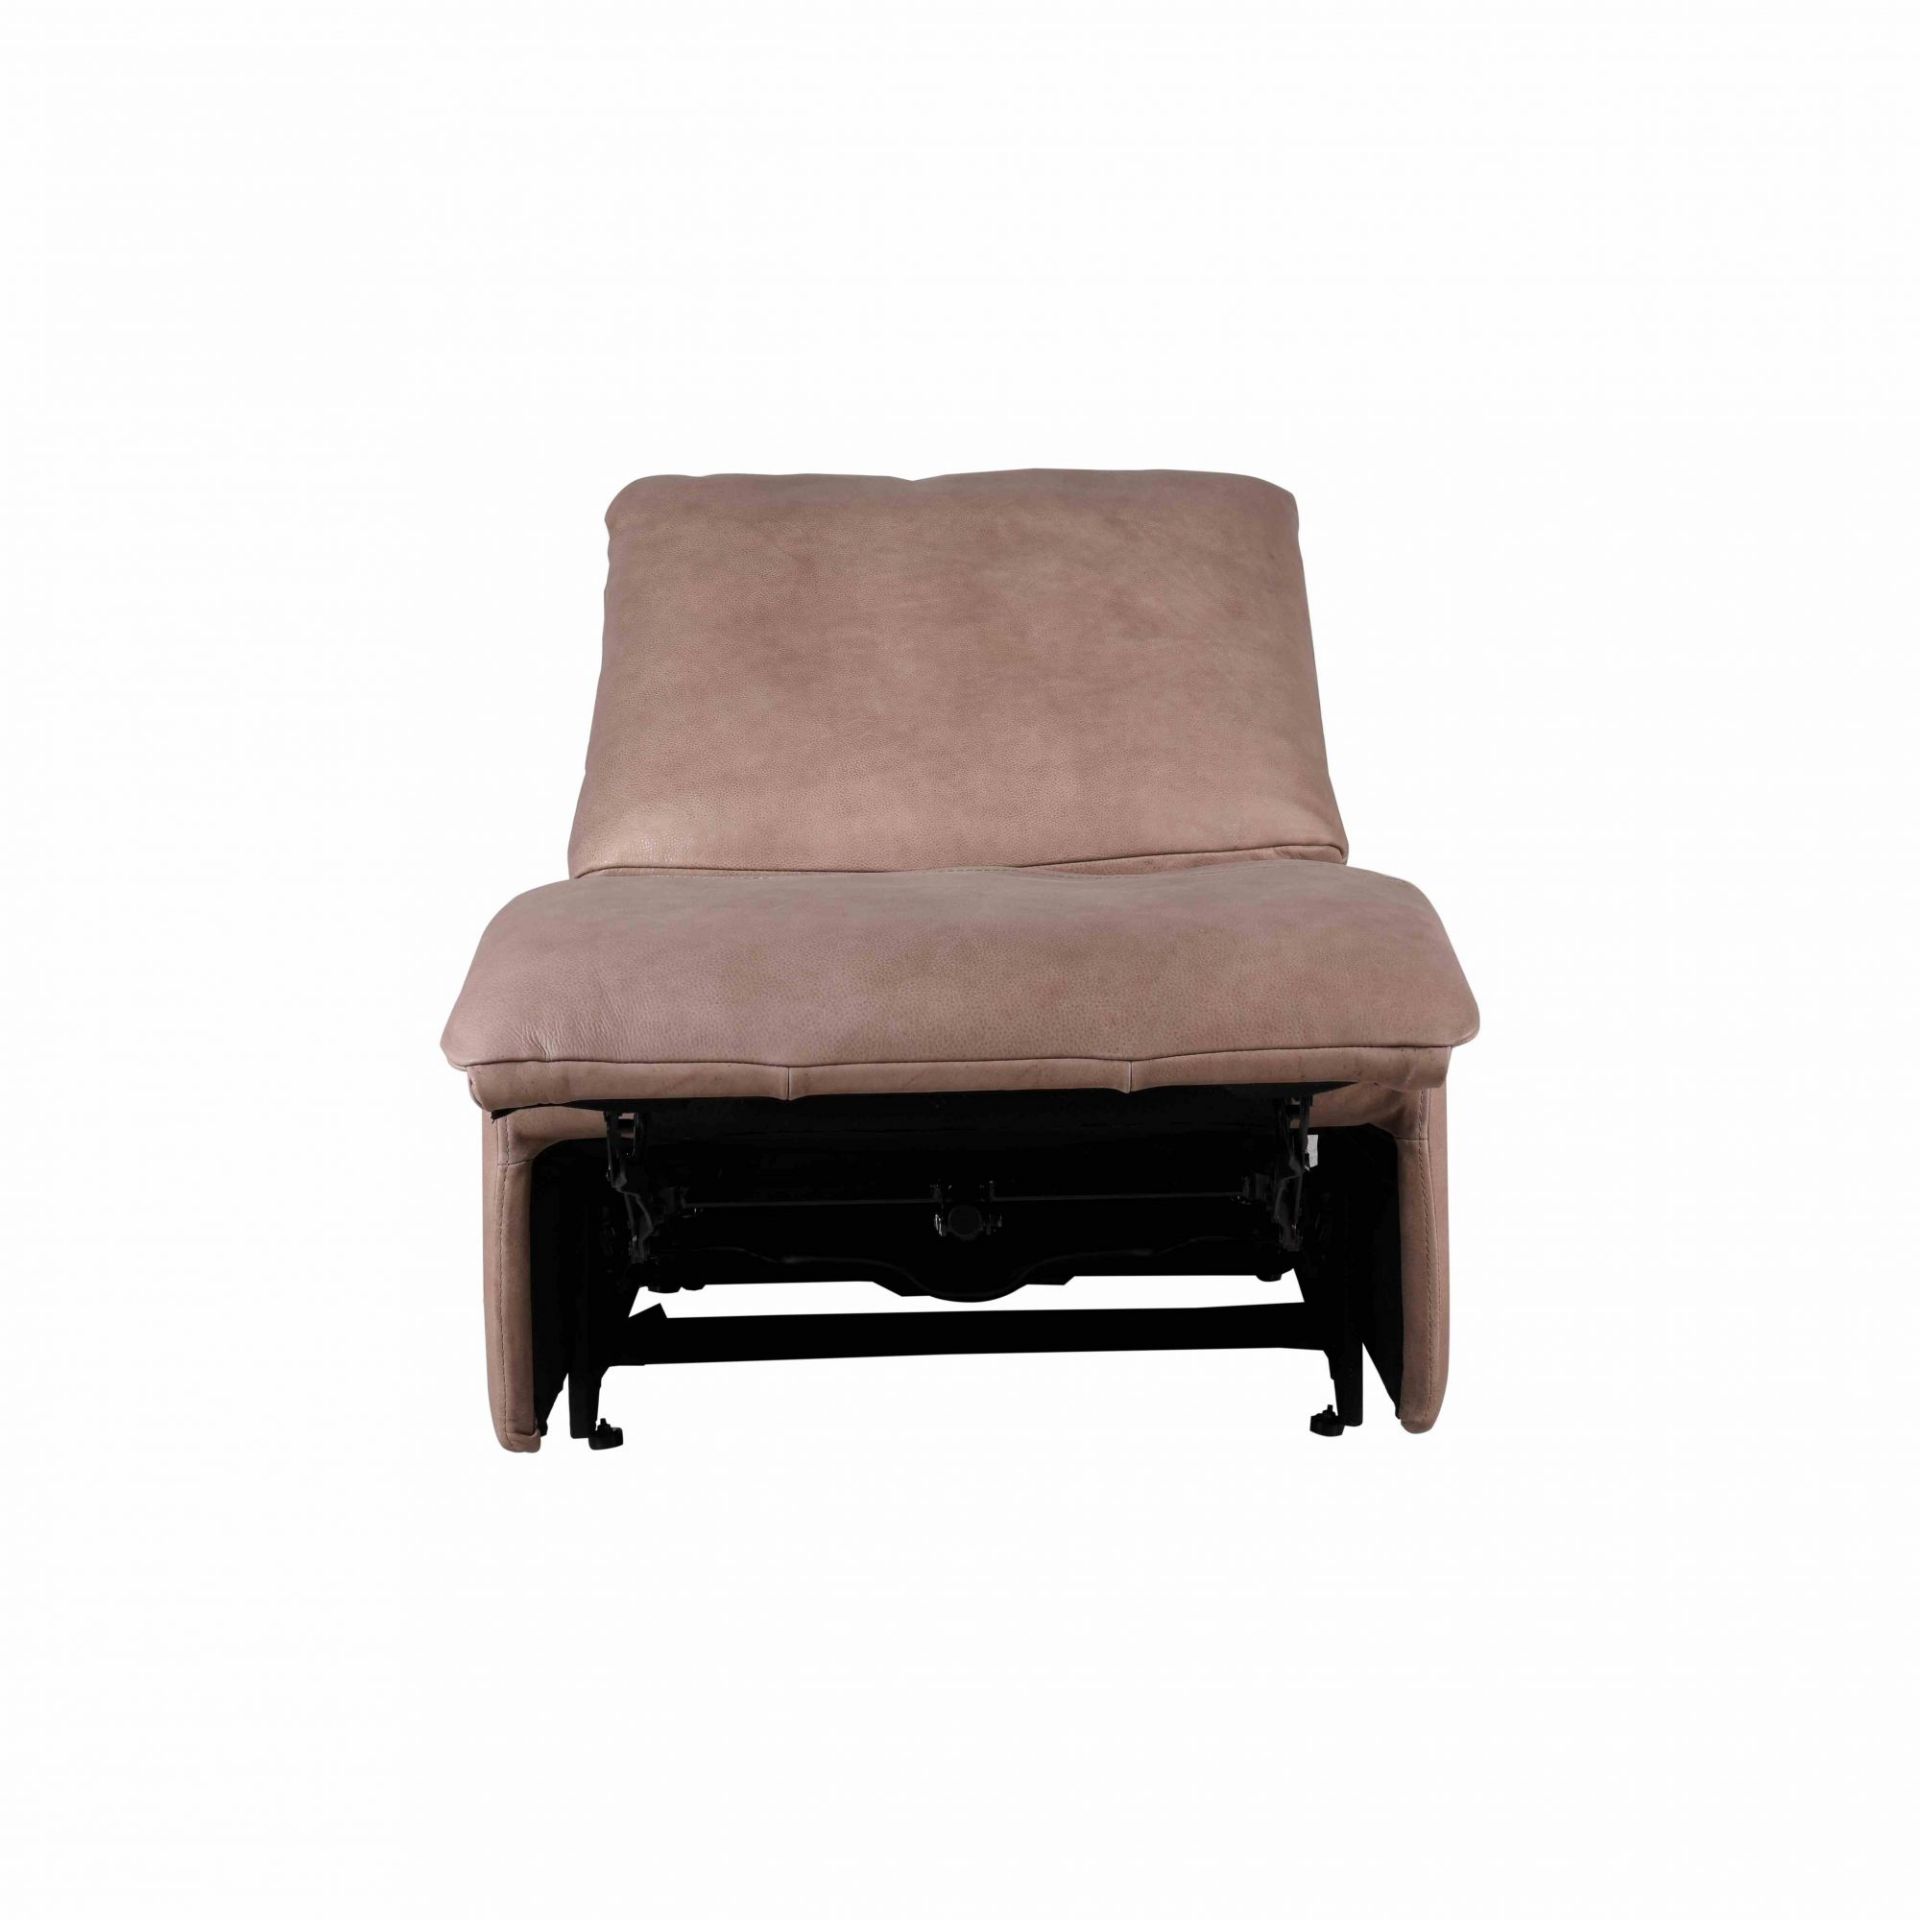 George Chair 1 Seater Sofa Graphite The George Is A Contemporary Armless Recliner Featuring Simple - Image 3 of 5